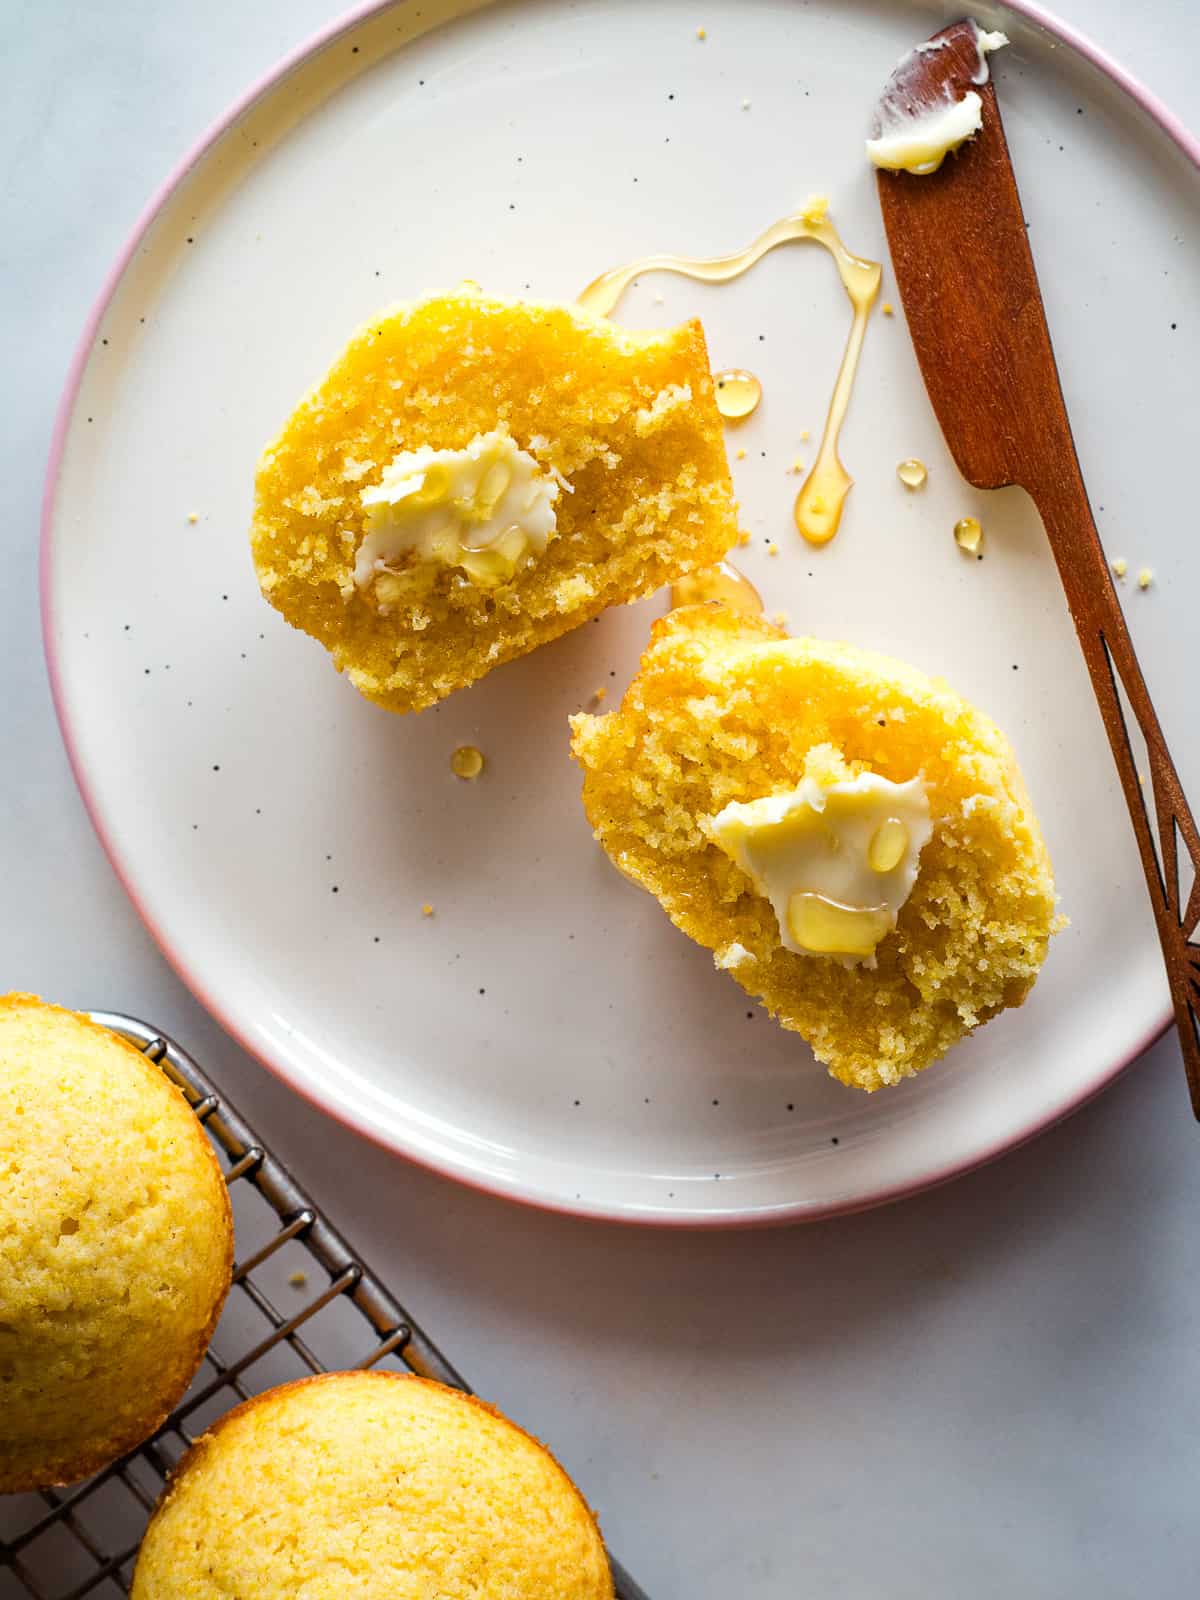 A gluten-free corn muffin split in half, spread with butter, and drizzled with honey.